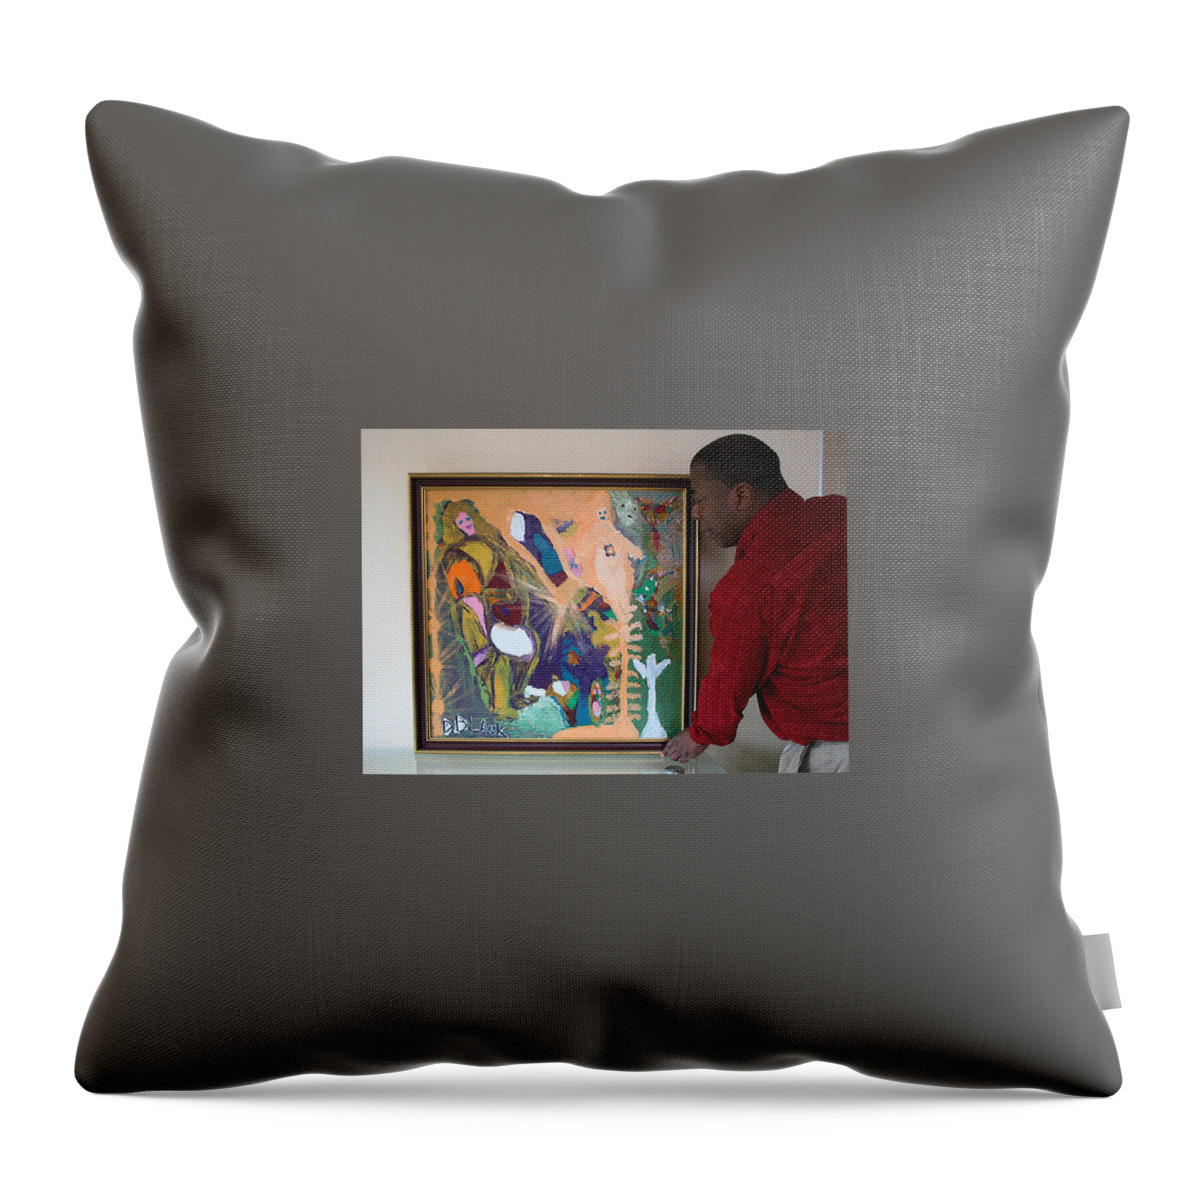 Multicultural Nfprsa Product Review Reviews Marco Social Media Technology Websites \\\\in-d�lj\\\\ Darrell Black Definism Artwork Throw Pillow featuring the painting Artist Darrell Black with Dominions Creation of A New Millennium by Darrell Black